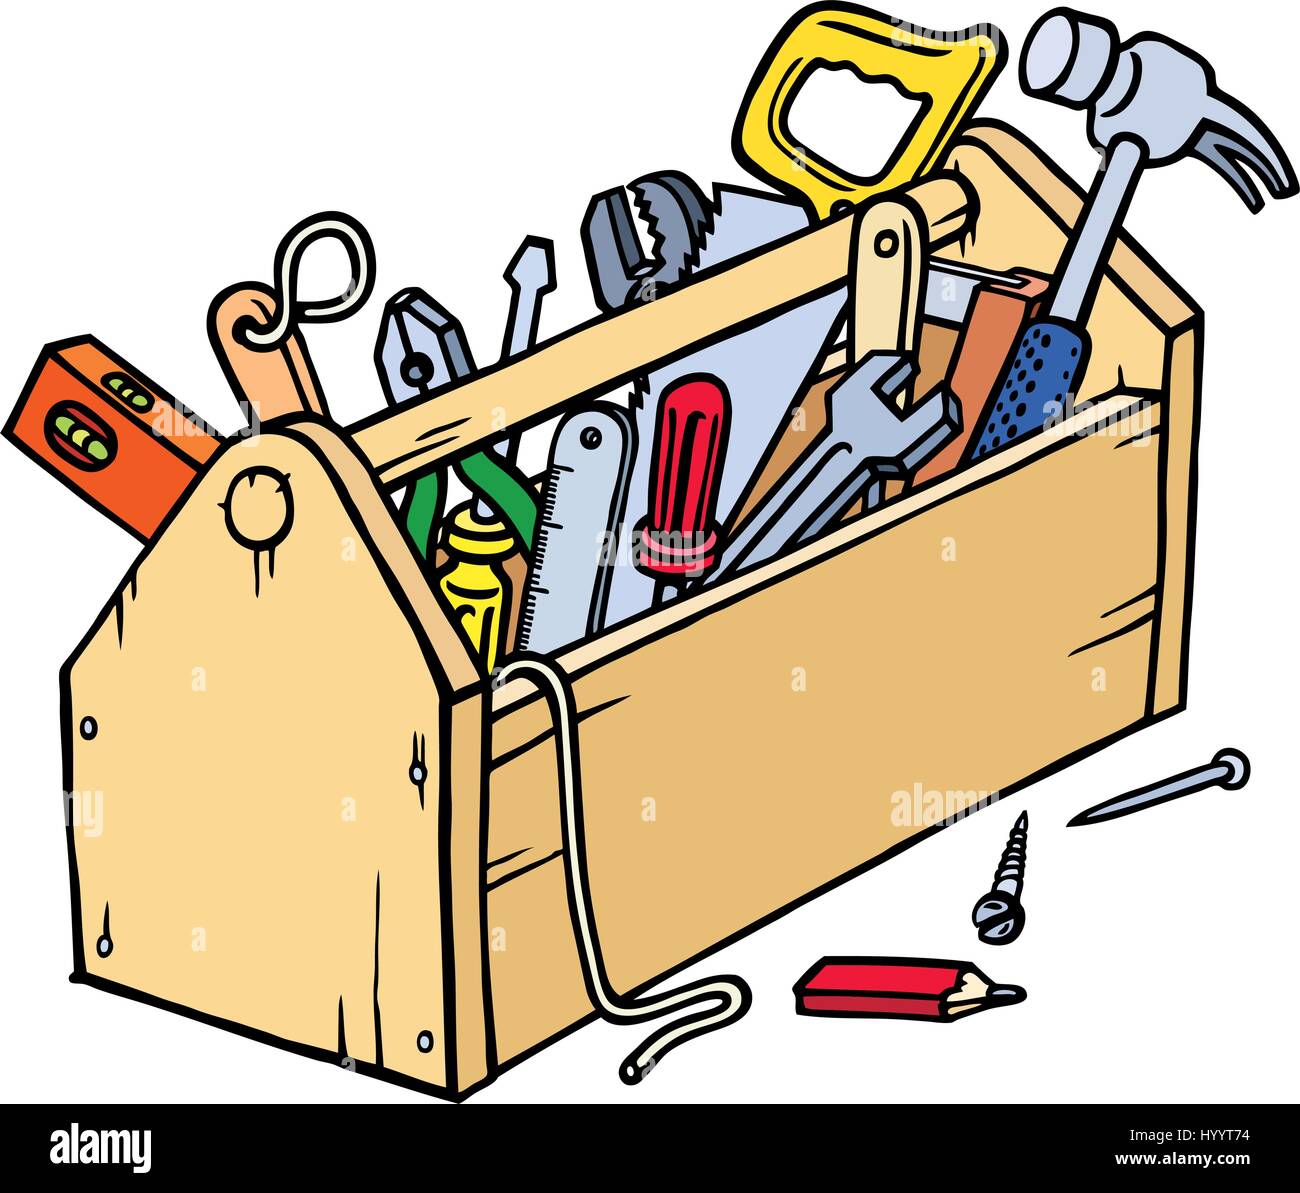 Tools from a toolbox. Vector Illustration Image Stock Vector Art